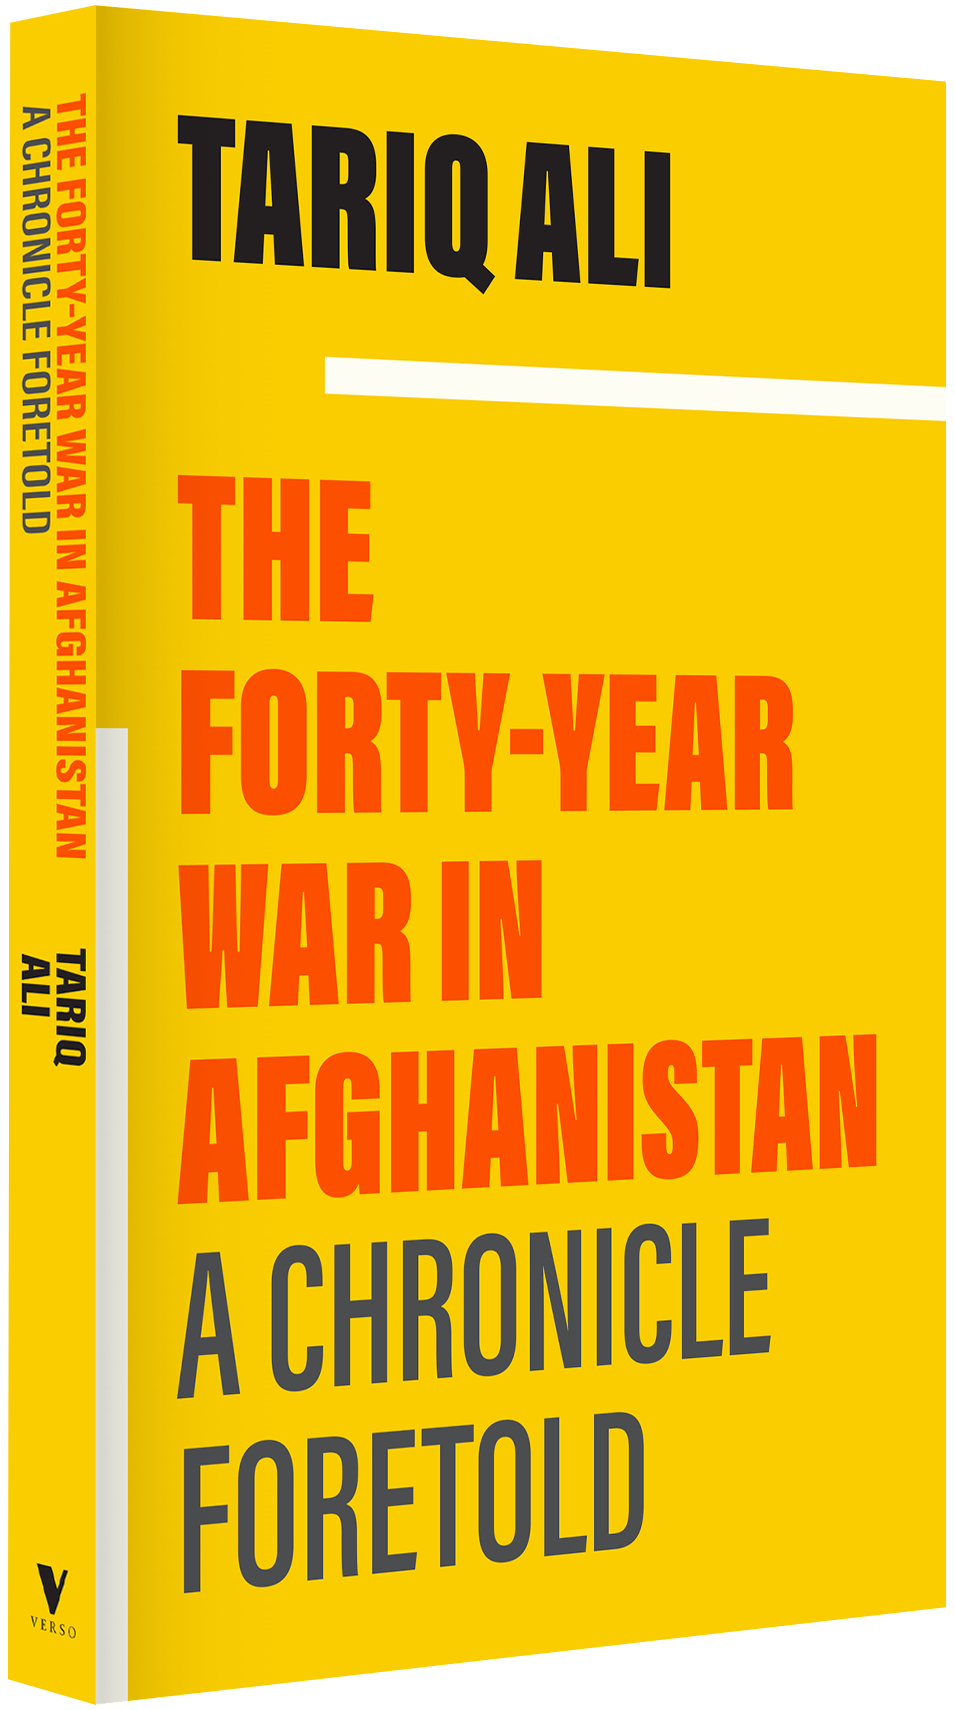 Image of The Forty-Year War in Afghanistan  A Chronicle Foretold - Tariq Ali